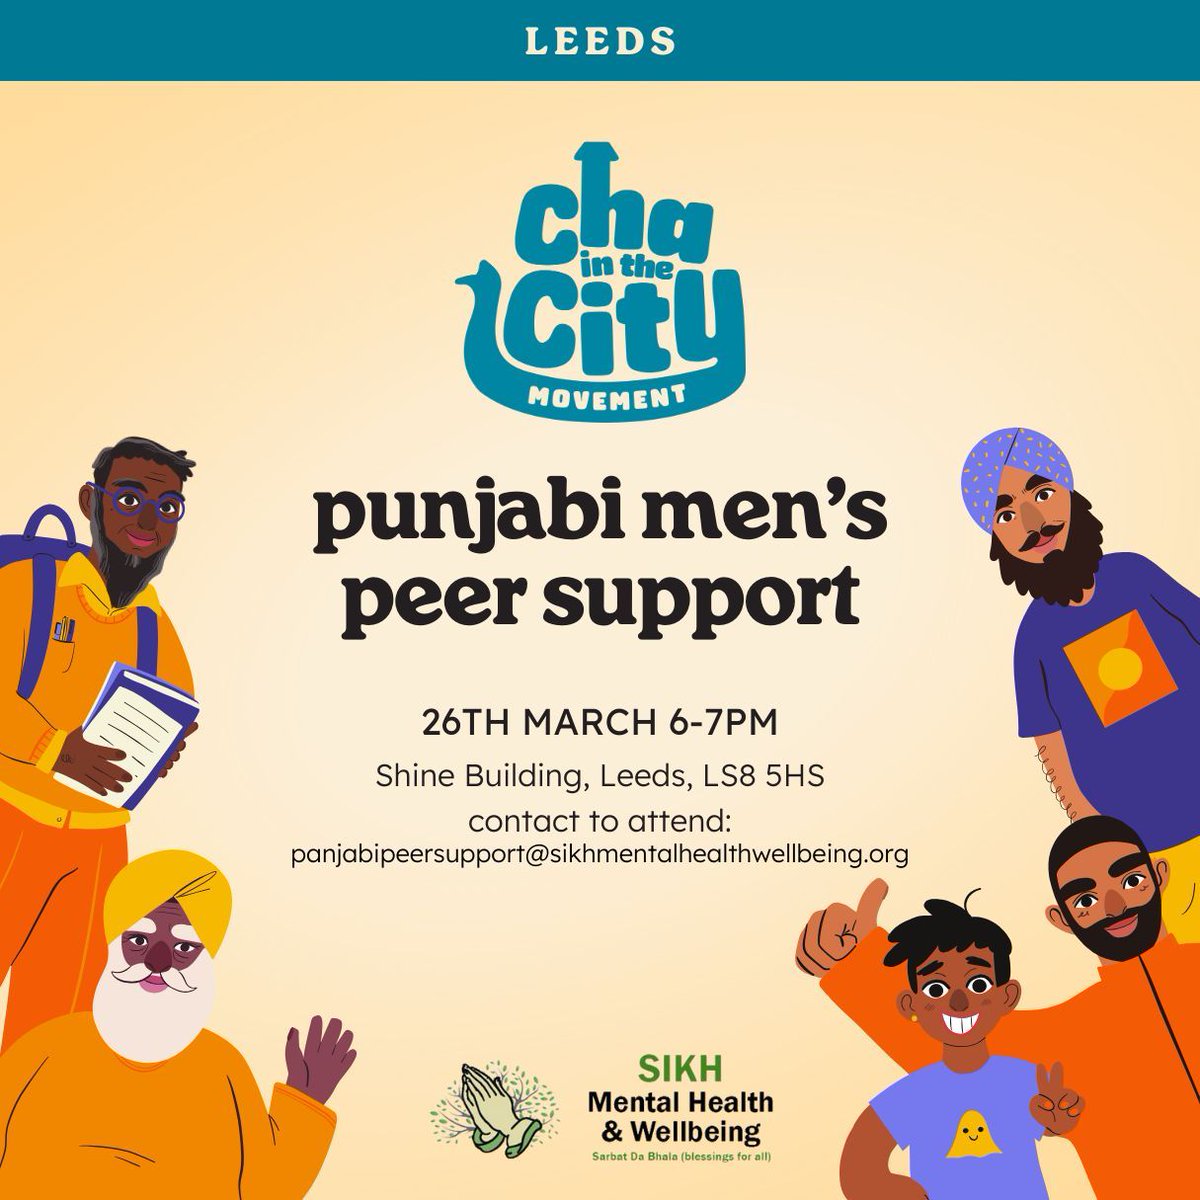 join @sikhmentalhealthwellbeing for their monthly open group for punjabi men in leeds! to register, head over to the link in @sikhmentalhealthwellbeing's bio! ✨ 💛